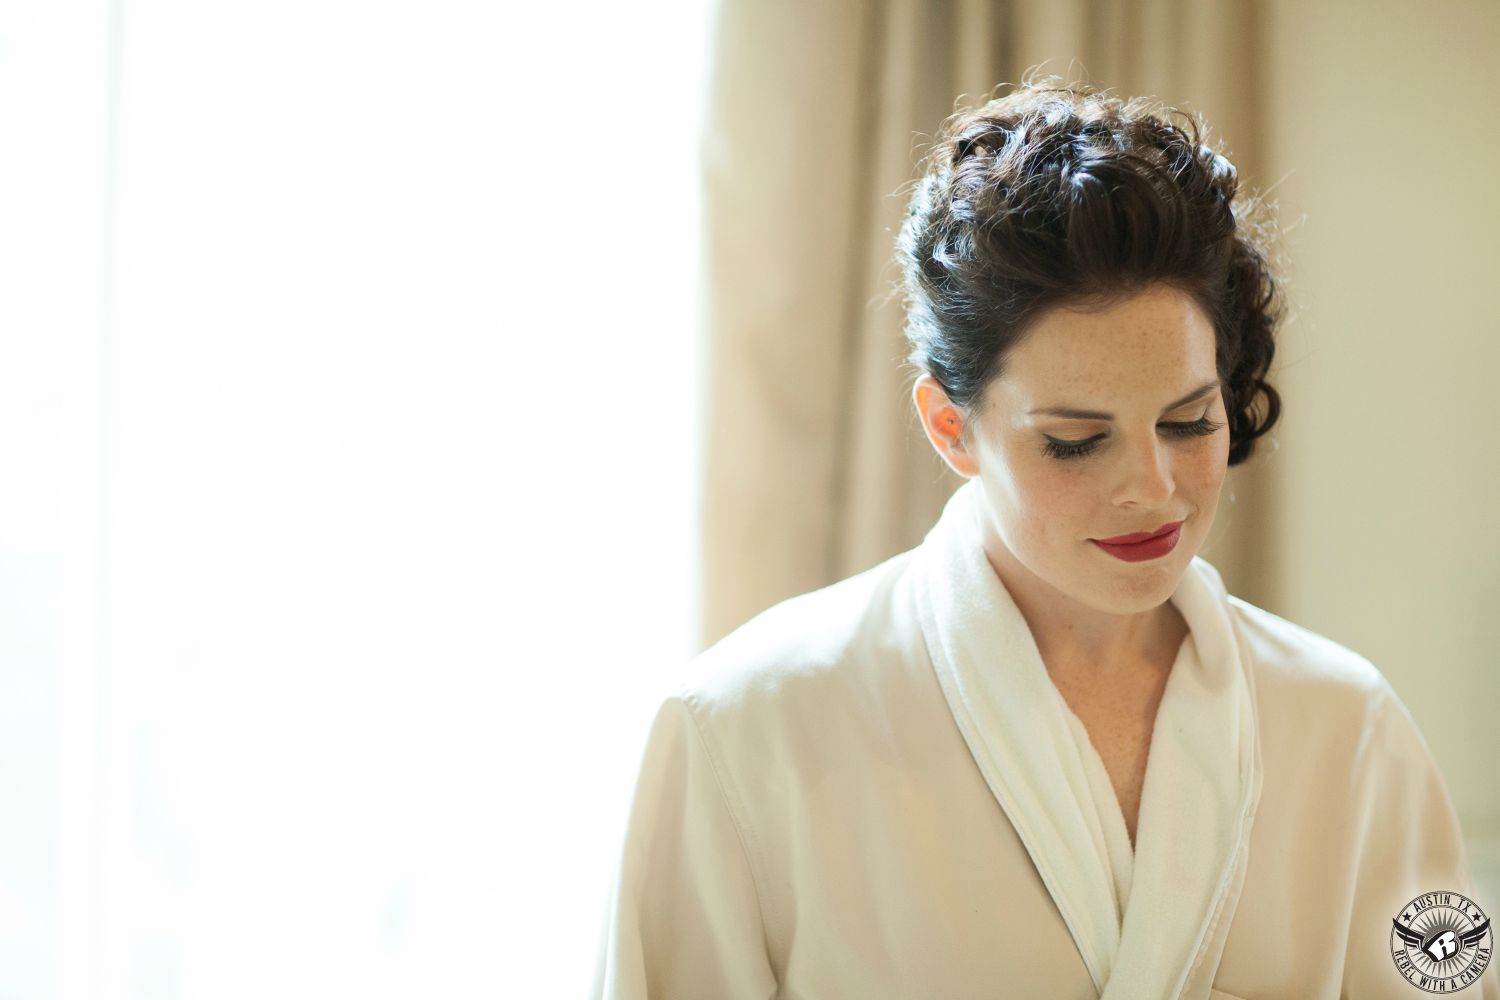 Dramatic picture of brunette curly haired bride with updo with gorgeous red lipstick on her lips hair and makeup by Mandy Hernandez looking down as she stands under the window in the bride's room at the Driskill Hotel in downtown Austin on her wedding day.